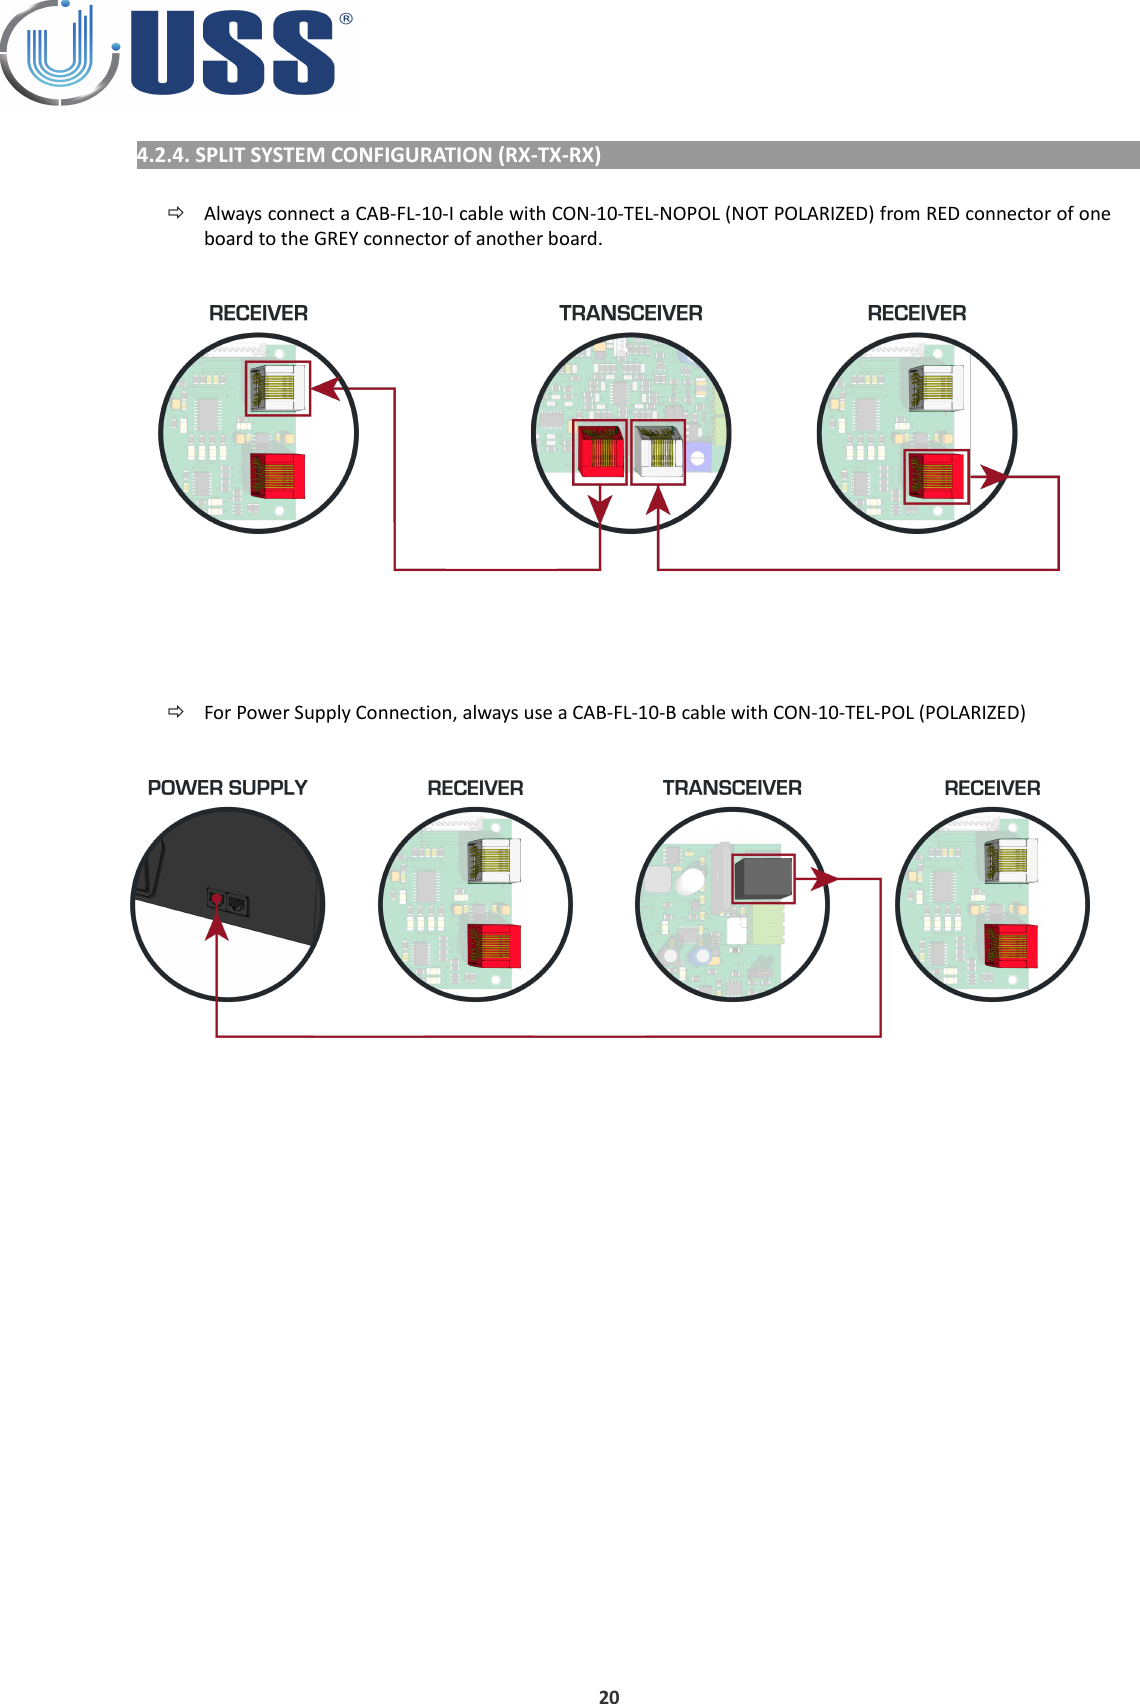 4.2.4. SPLIT SYSTEM CONFIGURATION (RX-TX-RX)Always connect a CAB-FL-10-I cable with CON-10-TEL-NOPOL (NOT POLARIZED) from RED connector of one board to the GREY connector of another board.For Power Supply Connection, always use a CAB-FL-10-B cable with CON-10-TEL-POL (POLARIZED)20